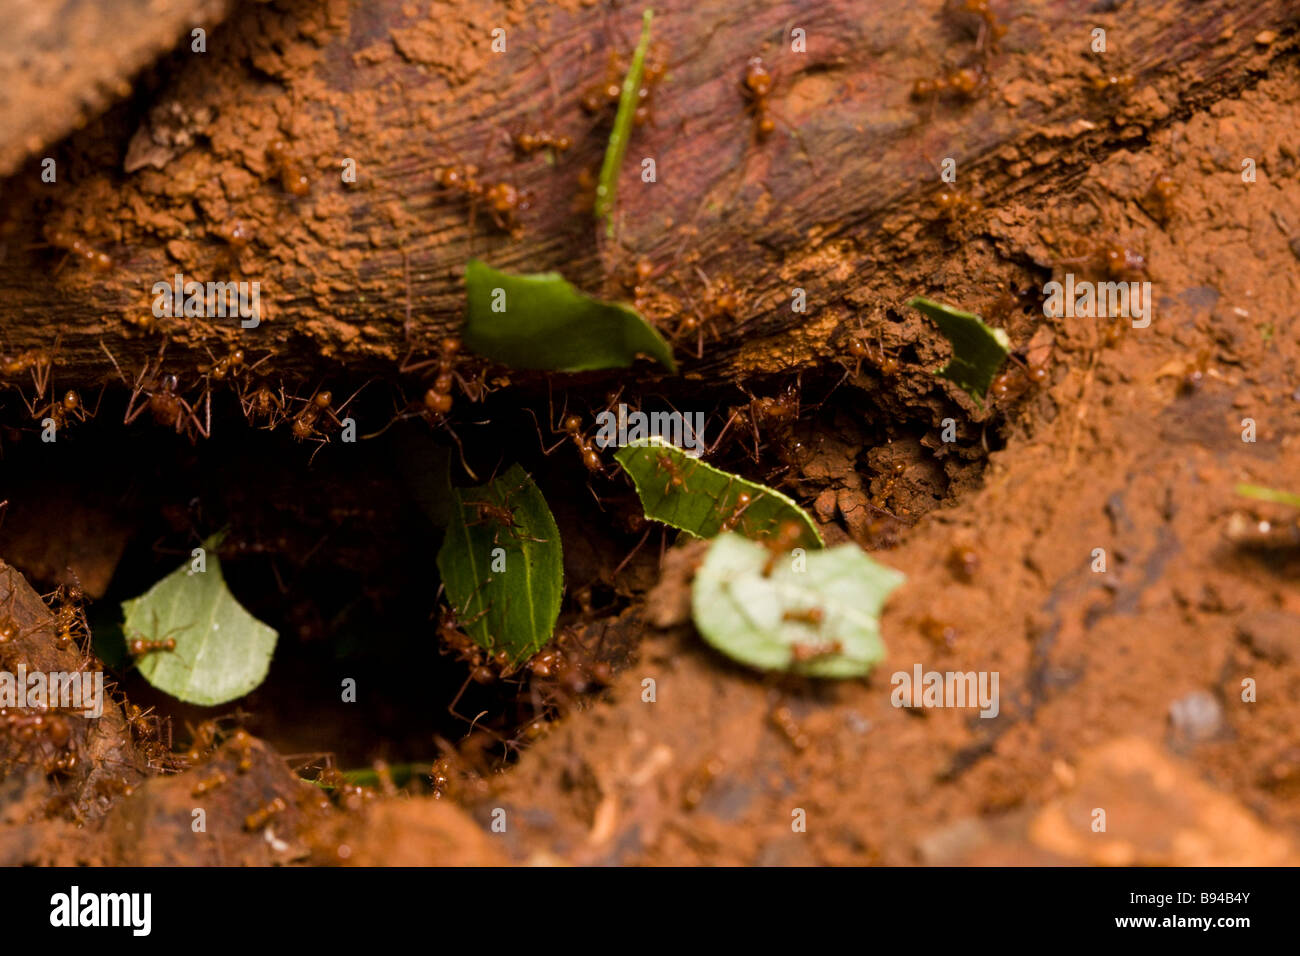 Leaf-cutter ants (Atta cephalotes) carrying leaf fragments into their nest in the Osa Peninsula, Costa Rica. Stock Photo